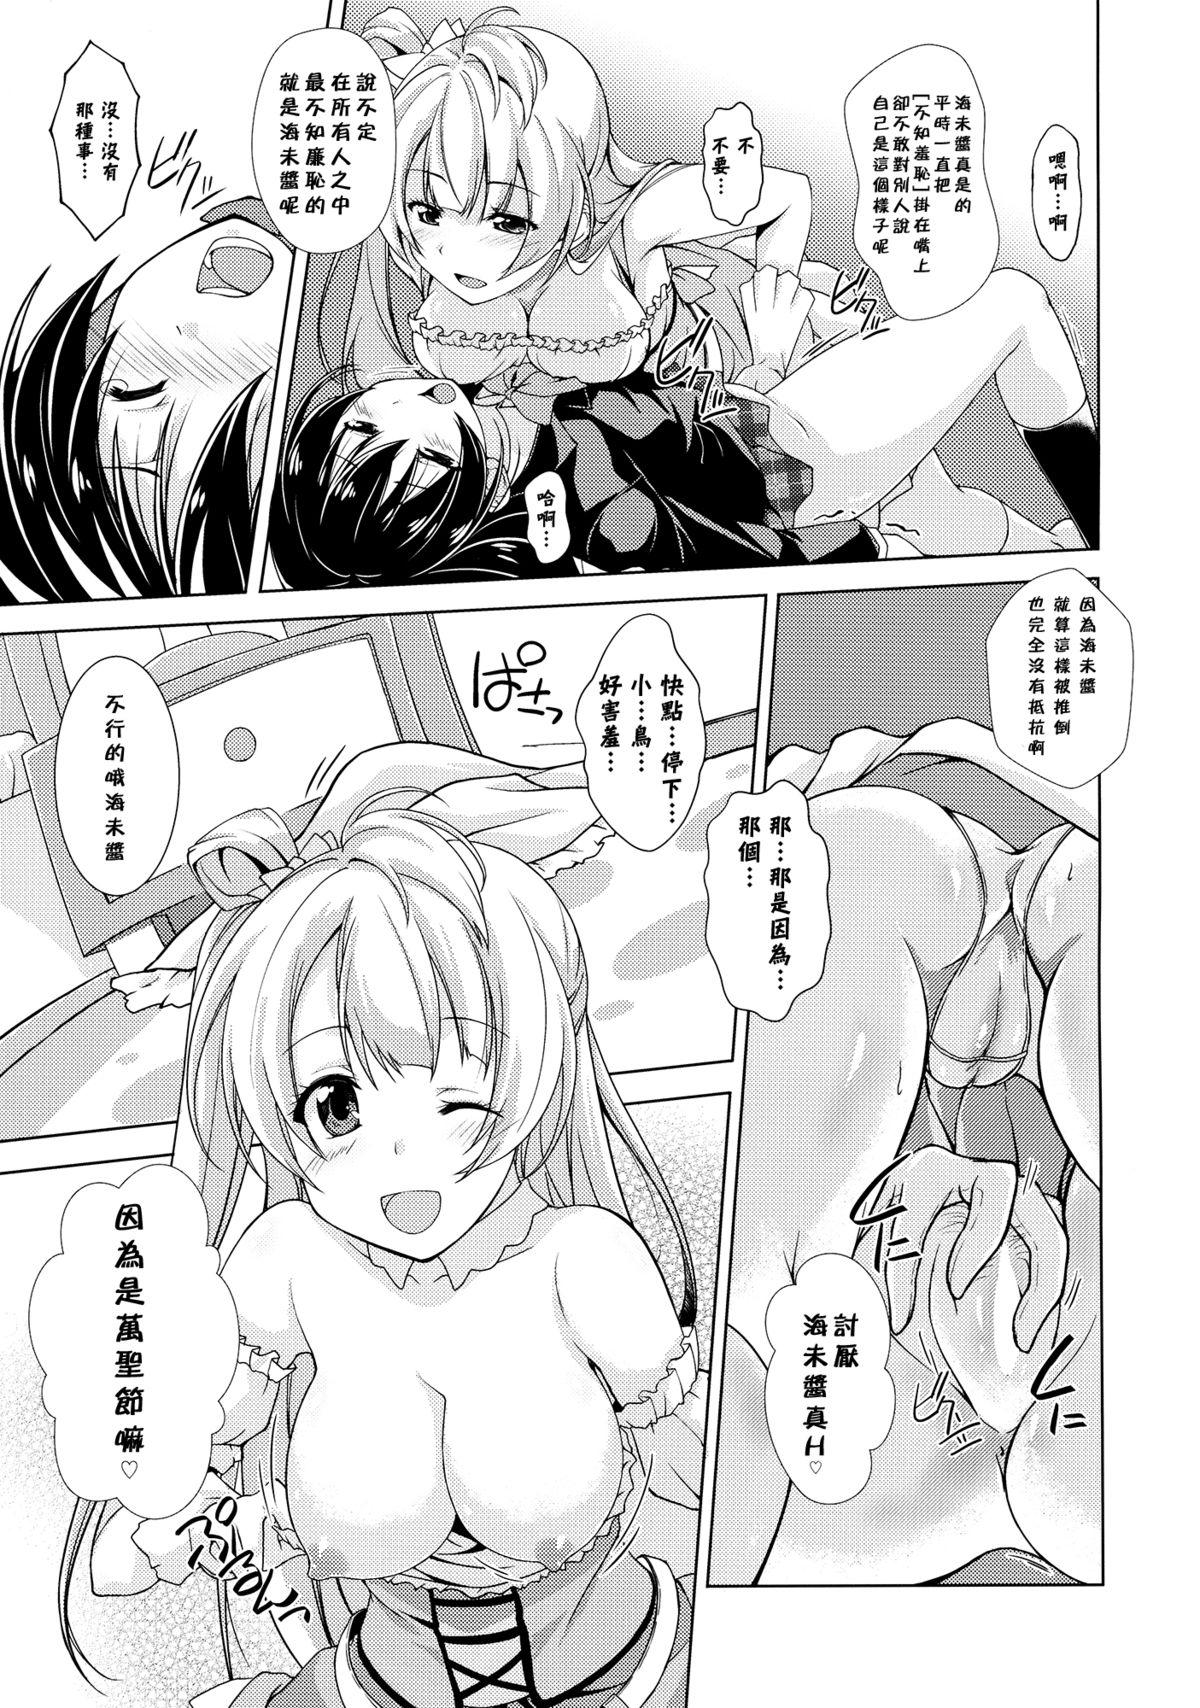 Brother Bavarois Passion - Love live Thylinh - Page 8